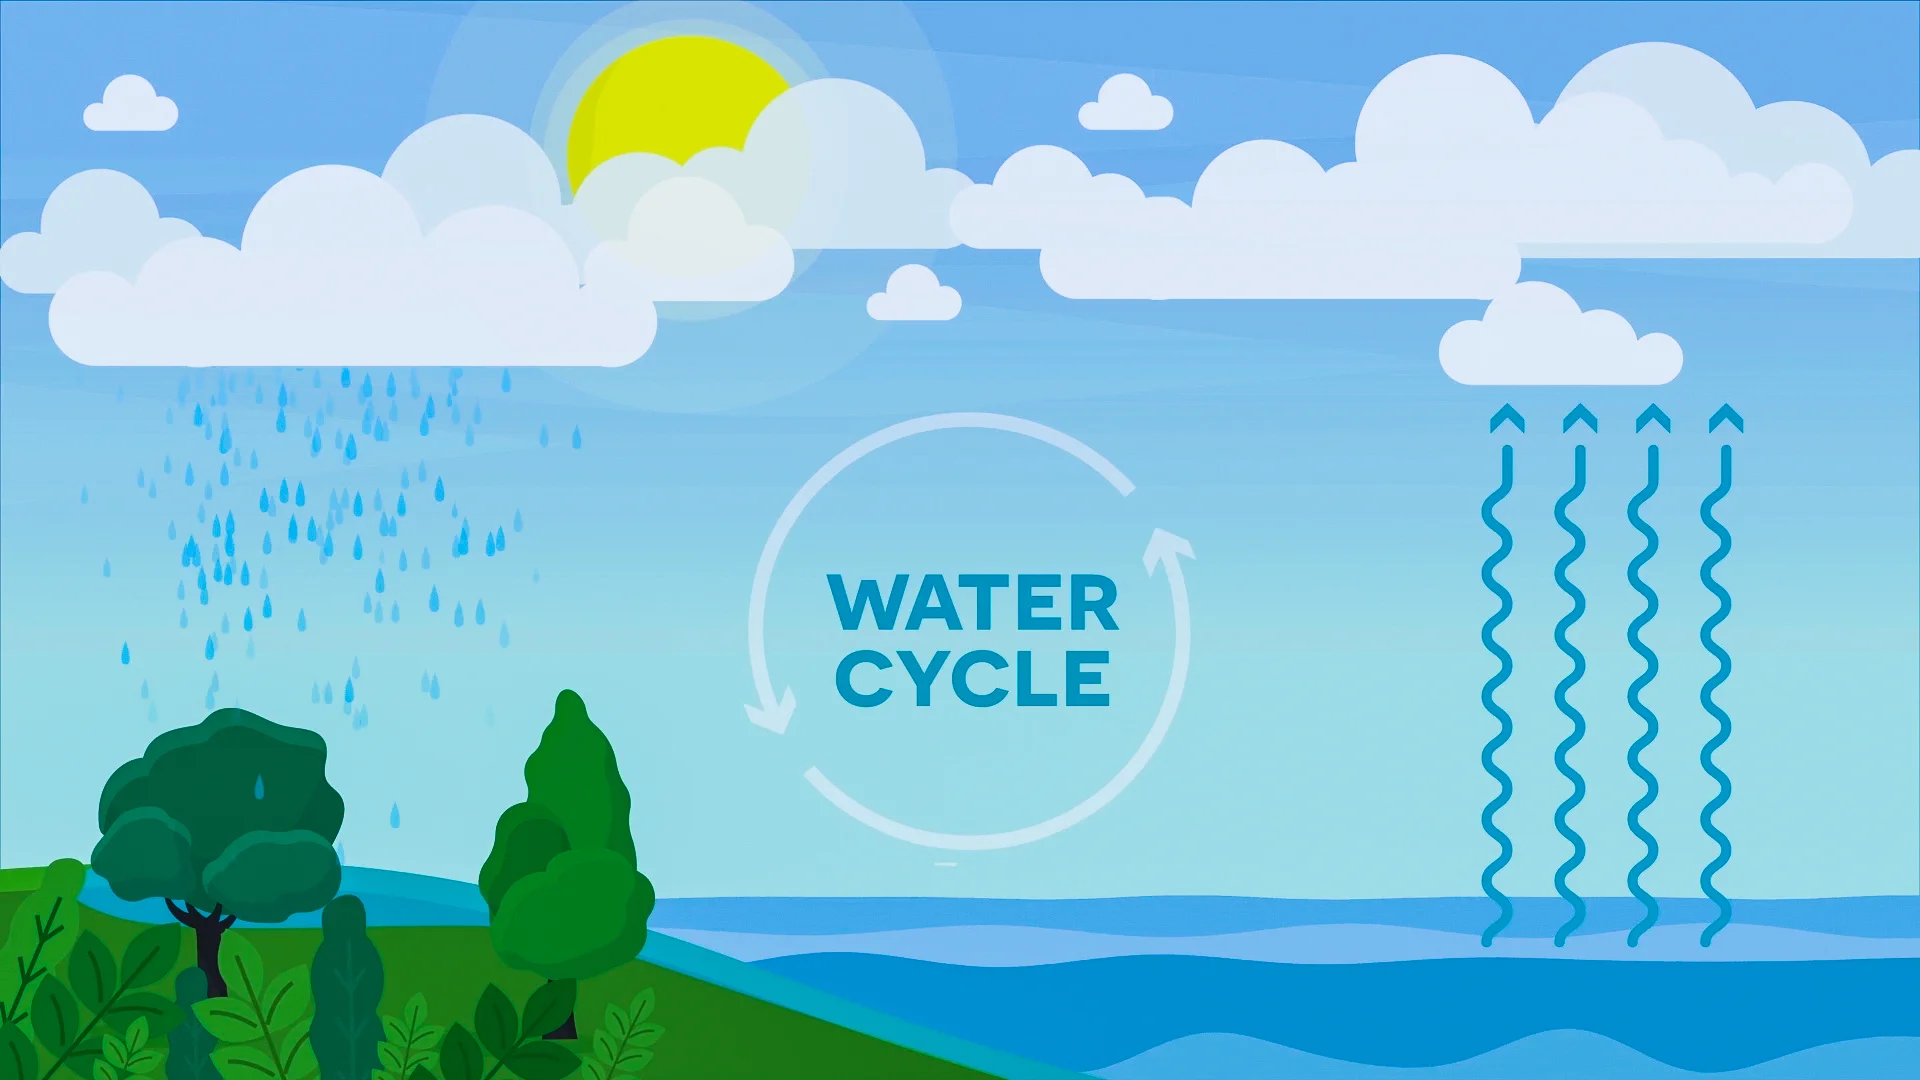 How to draw a water cycle easy step by step, Water cycle diagram drawing  for beginners - YouTube